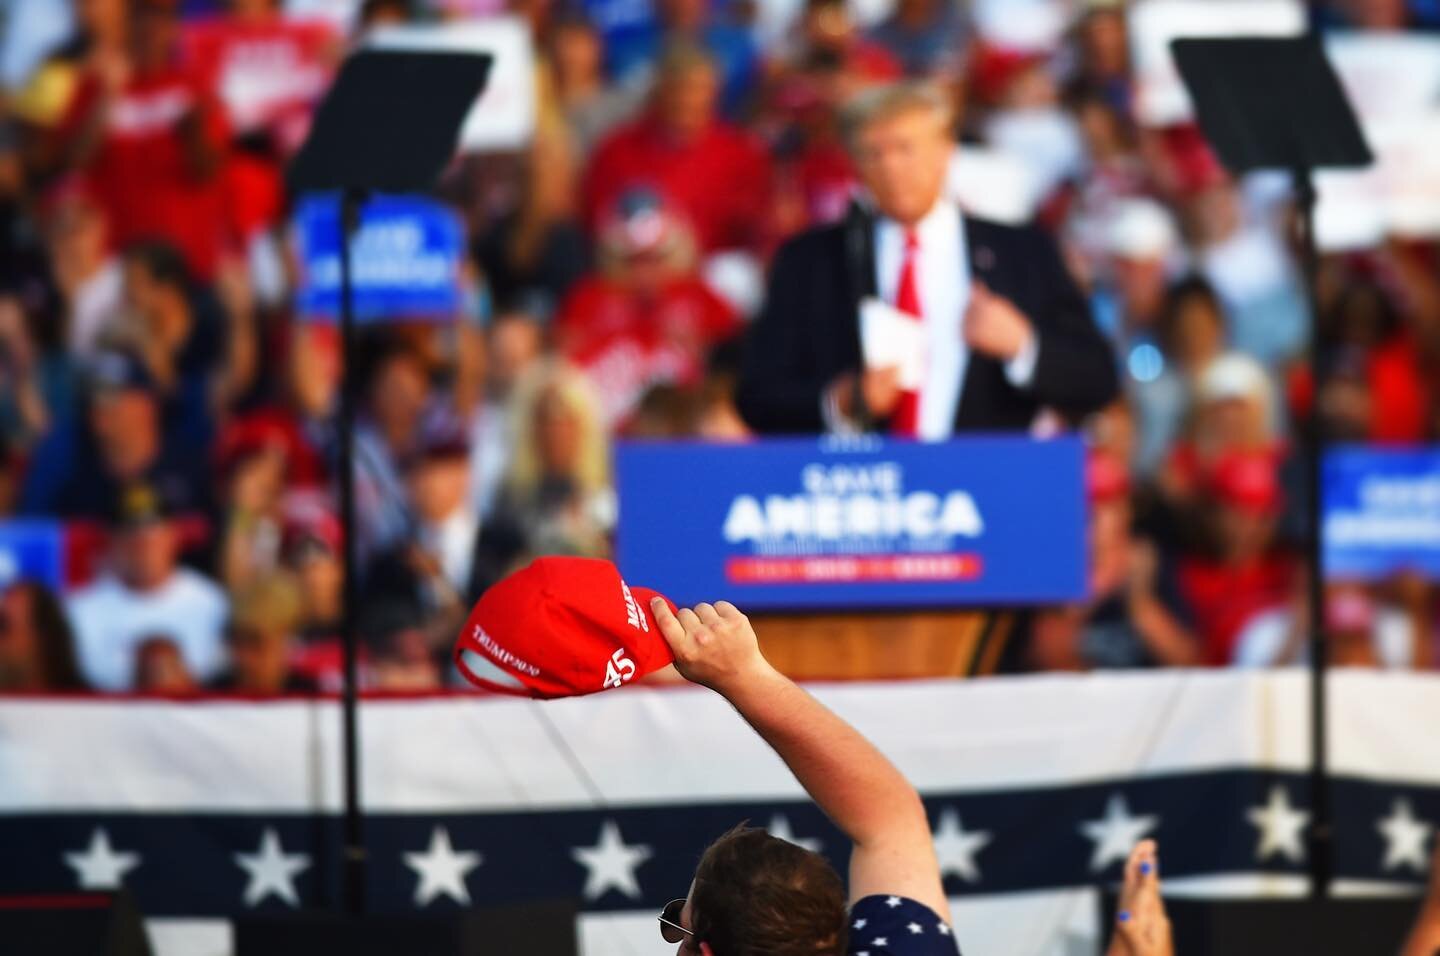 On assignment this past weekend for @chroniclet.
.
Donald Trump visited Lorain County this past Saturday, June 26. The &ldquo;Save America&rdquo; rally was hosted at the Lorain County fairgrounds with several thousand in attendance who came to see th